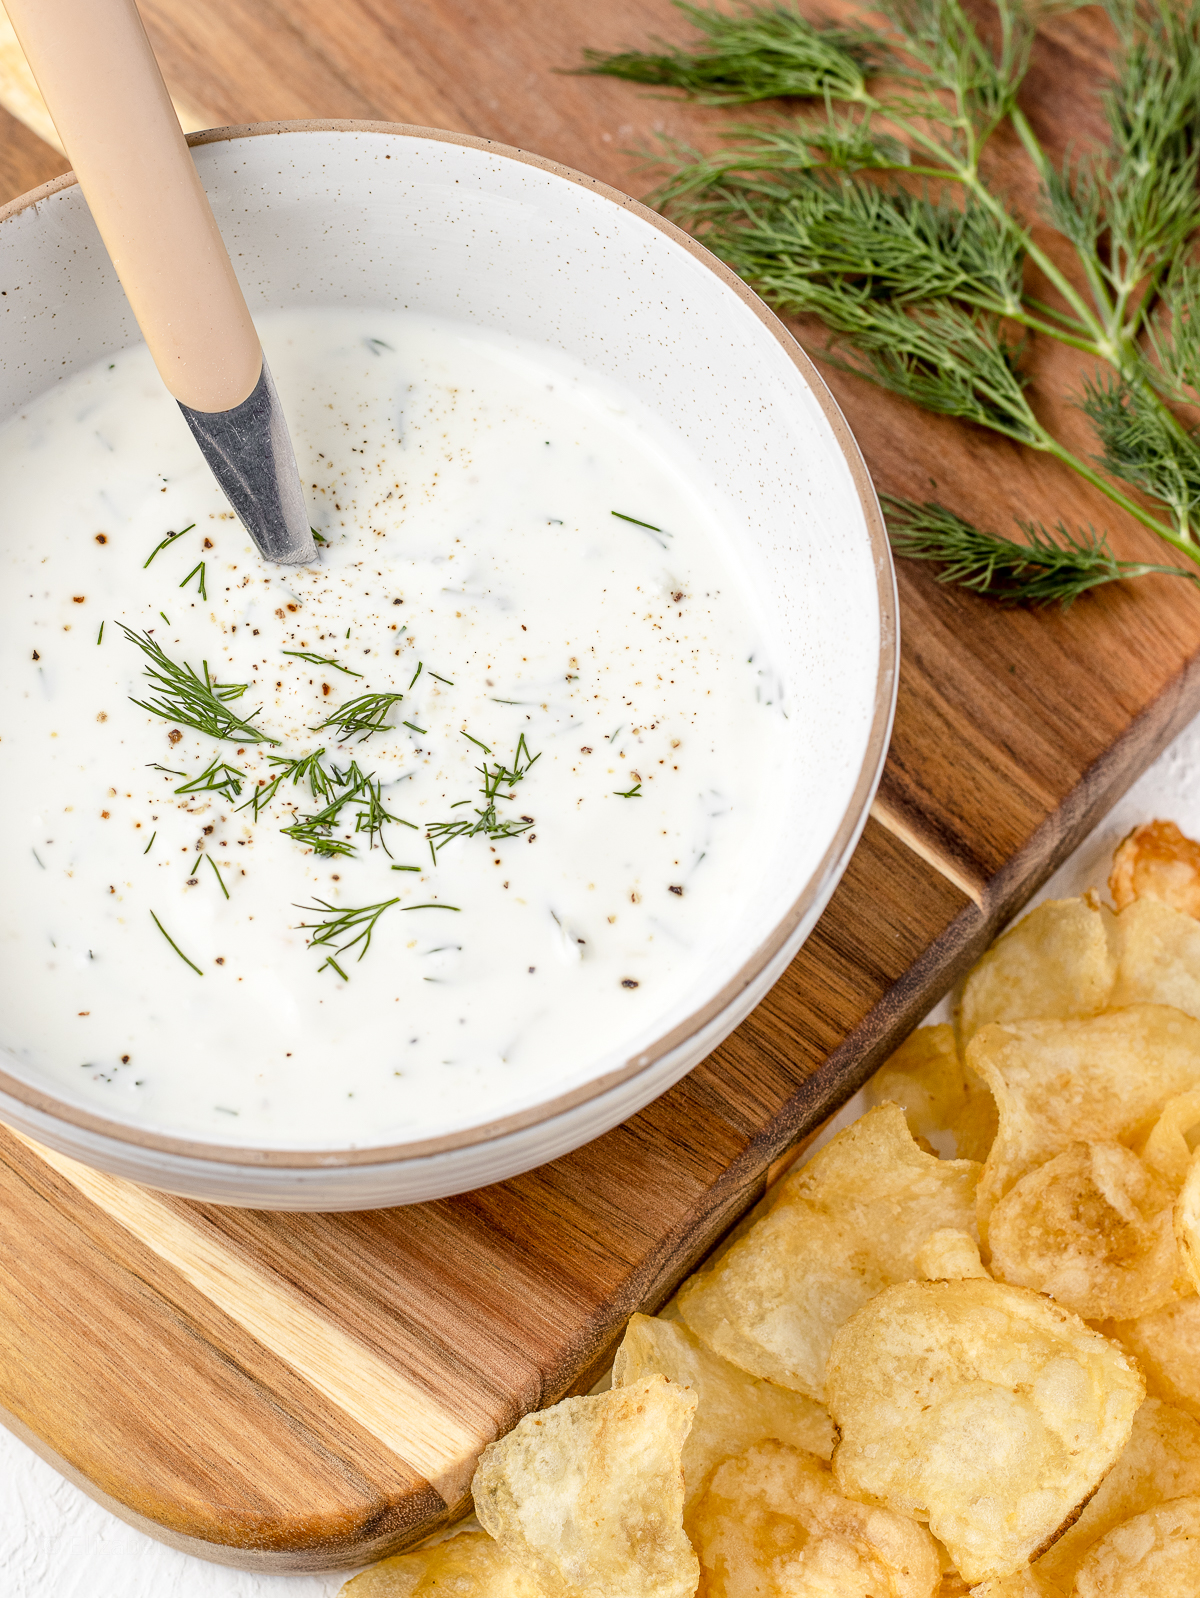 Bowl of Yogurt Dill Sauce with a spoon, dill and potato chips on the side.